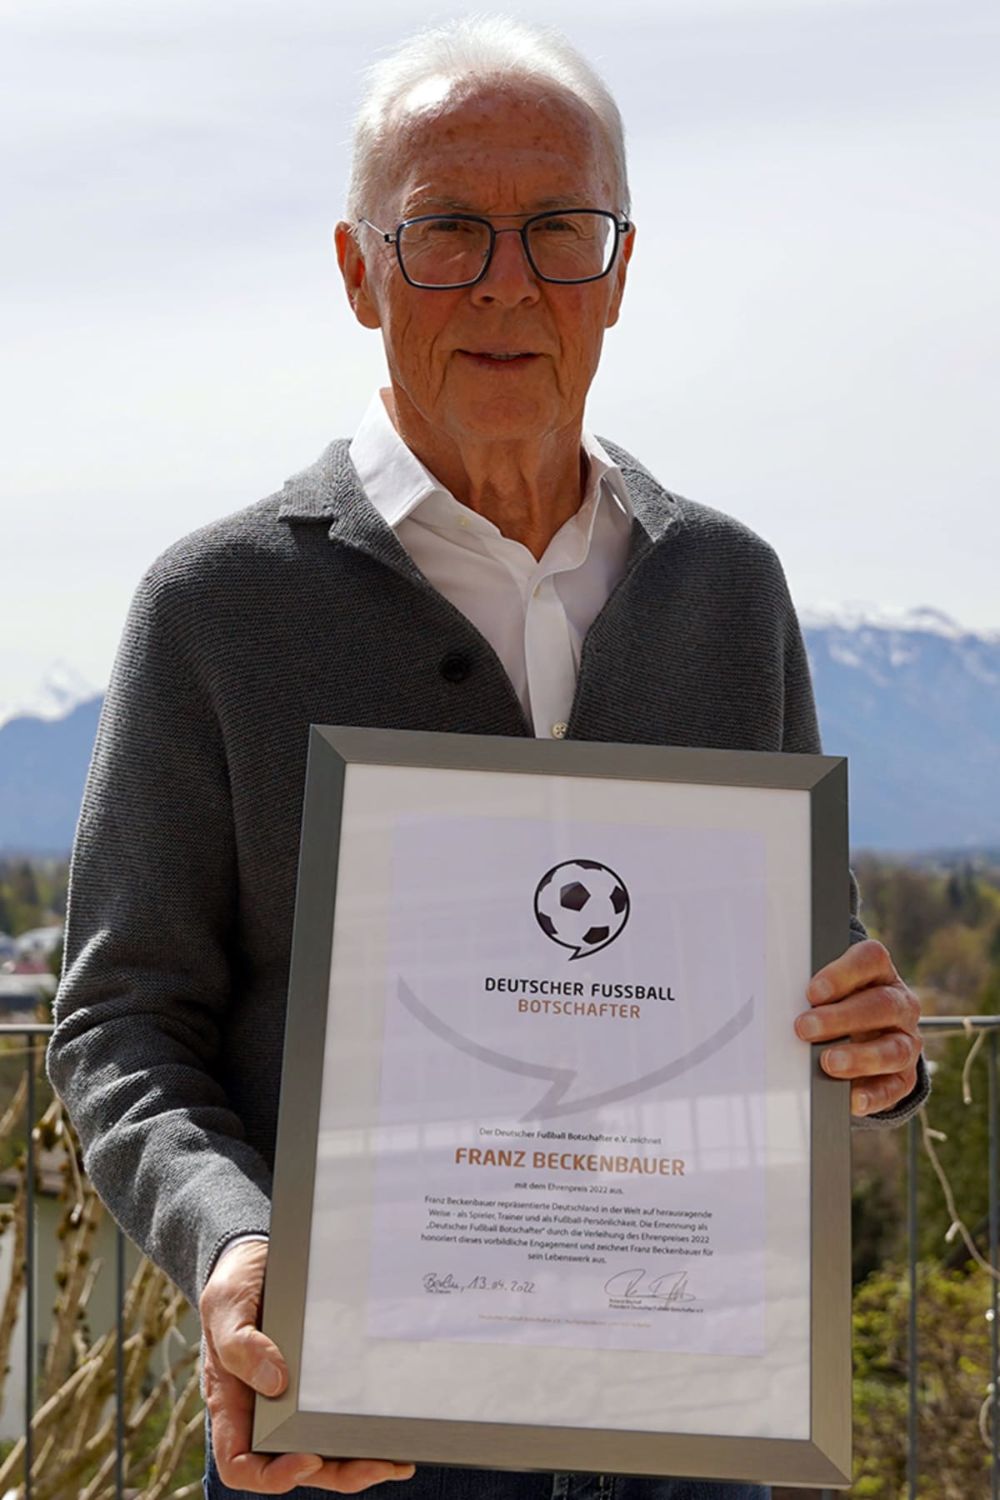 Top 10 Greatest Soccer Players of All Time- Franz Beckenbauer